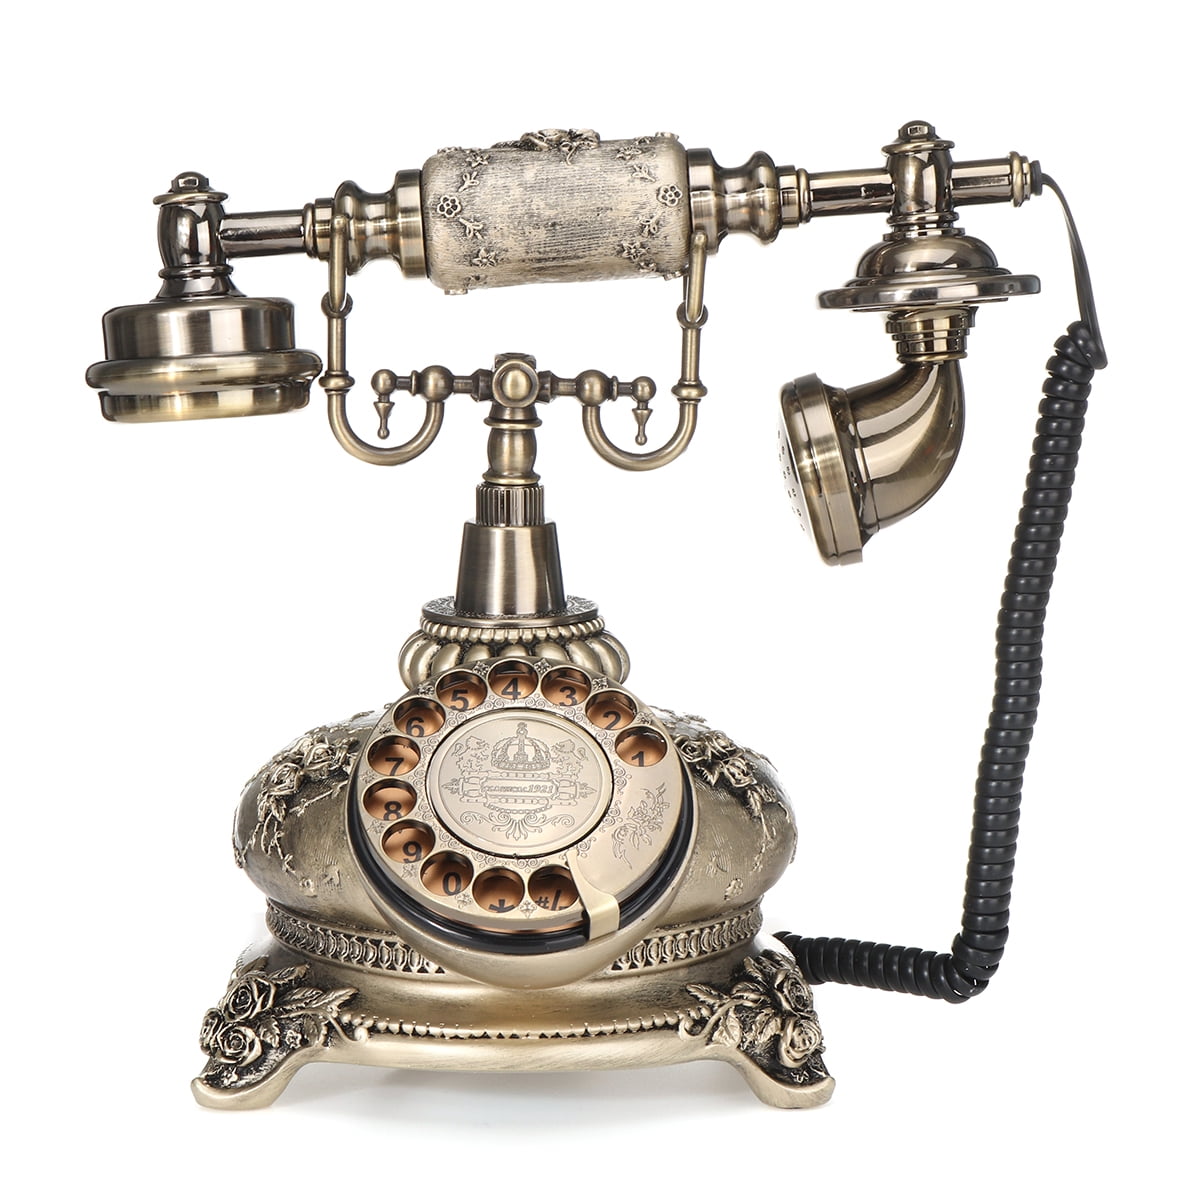 TelPal Bronze Retro Vintage Antique Style Rotary Dial Button Desk Telephone Phone Home Office Telephone Set 